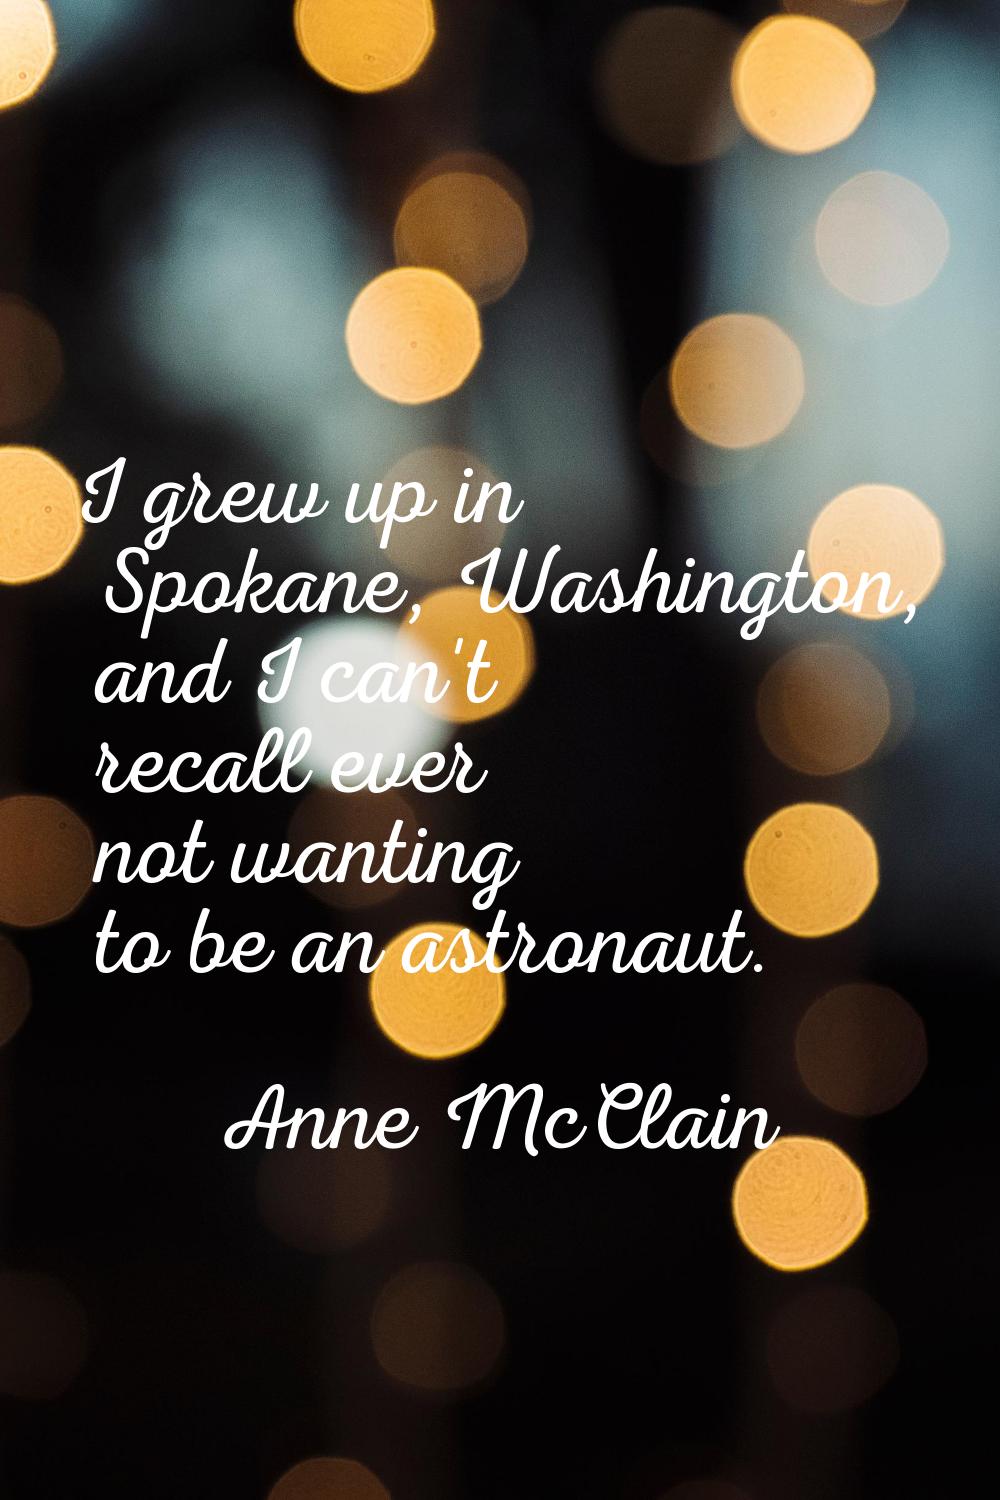 I grew up in Spokane, Washington, and I can't recall ever not wanting to be an astronaut.